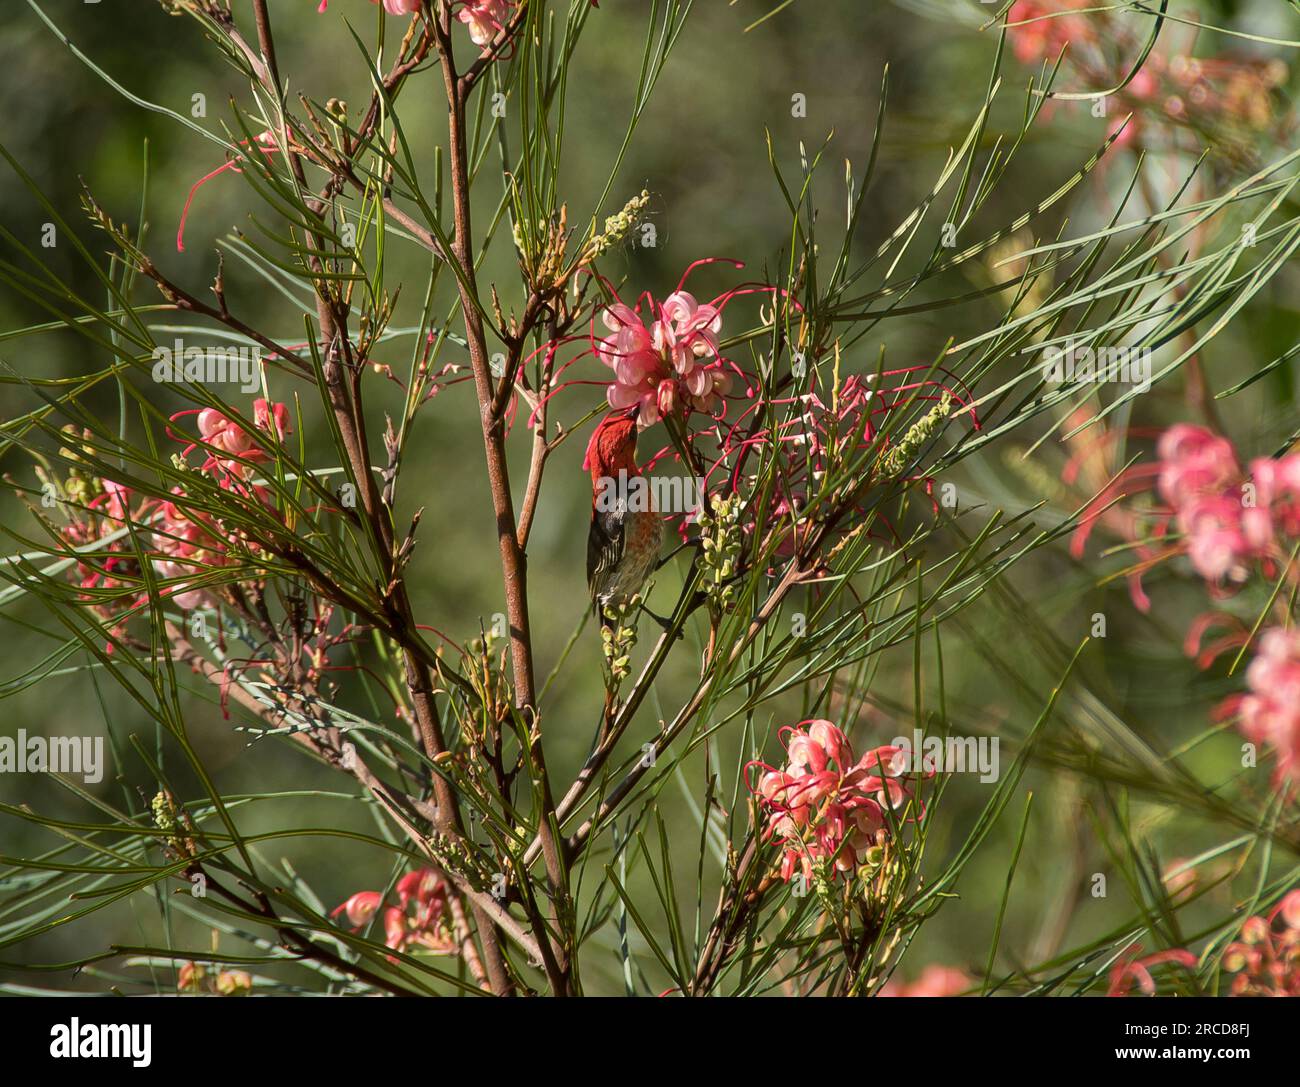 Tiny Australian male Scarlet Honeyeater, Myzomela sanguinolenta, perched in grevillea bush with pink flowers and green foliage. Queensland, spring. Stock Photo